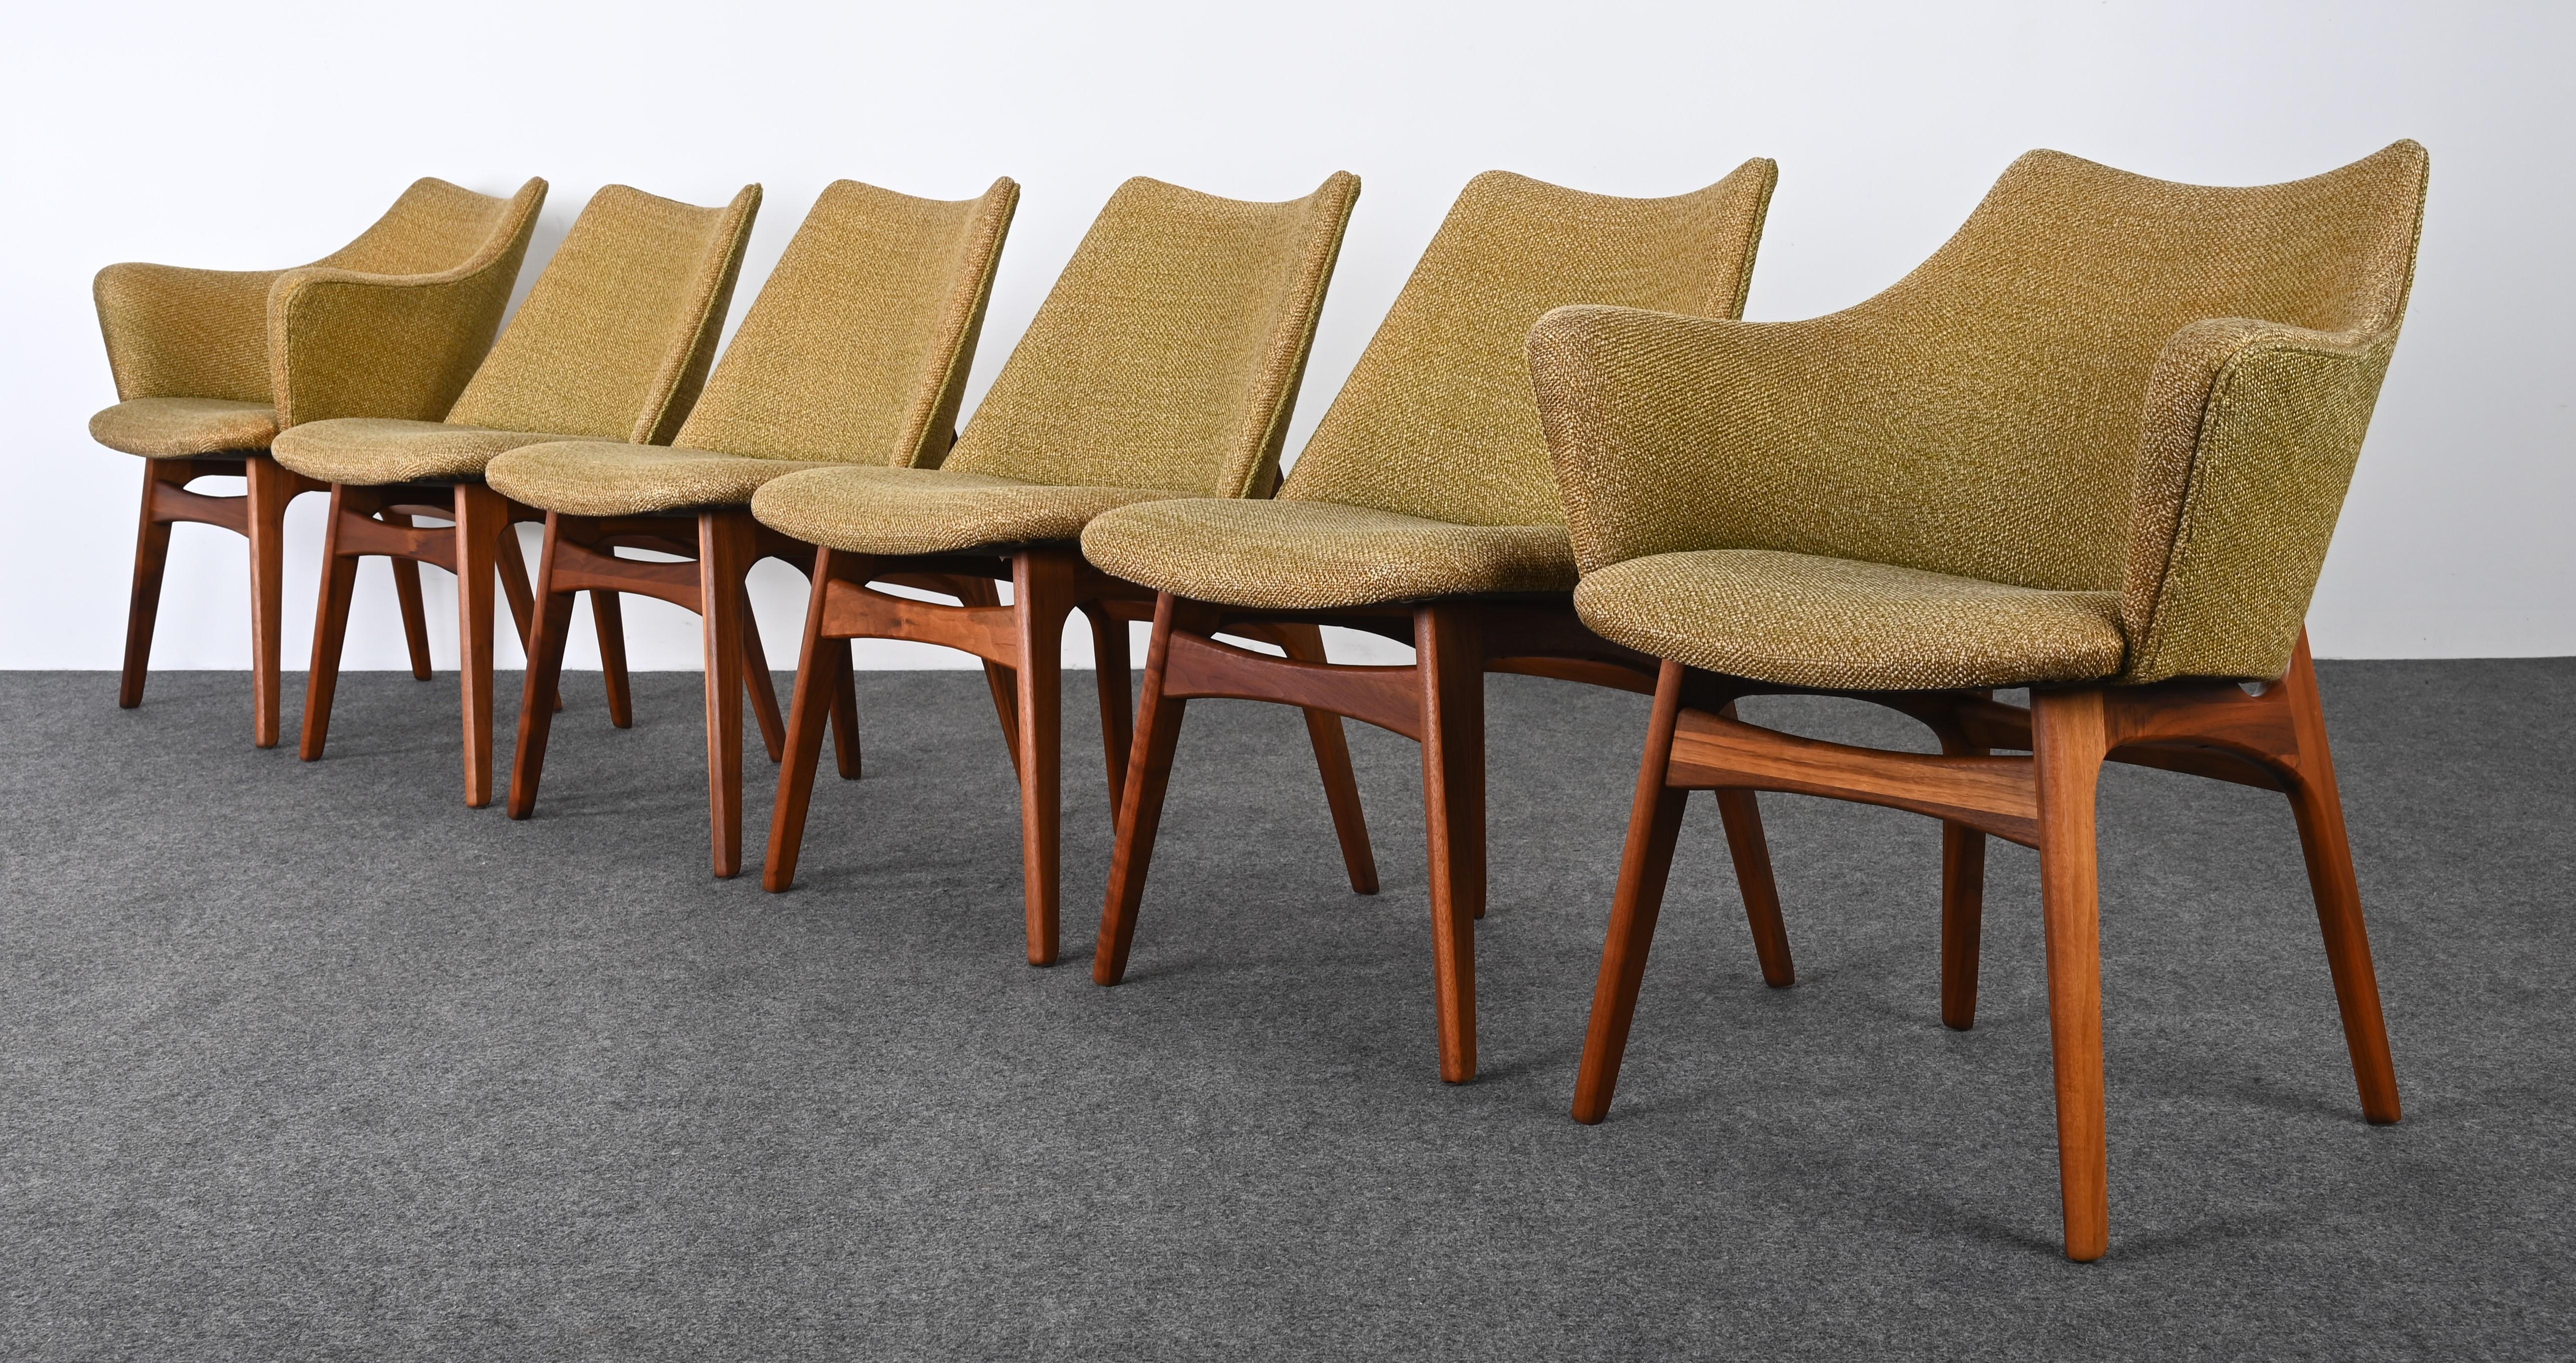 A sculptural Mid-Century Modern set of six dining chairs by Adrian Pearsall. This amazing set of chairs represents form and function. The accented structure of the leg on Model 2416-C is absolutely stunning. The chairs are made of walnut wood and